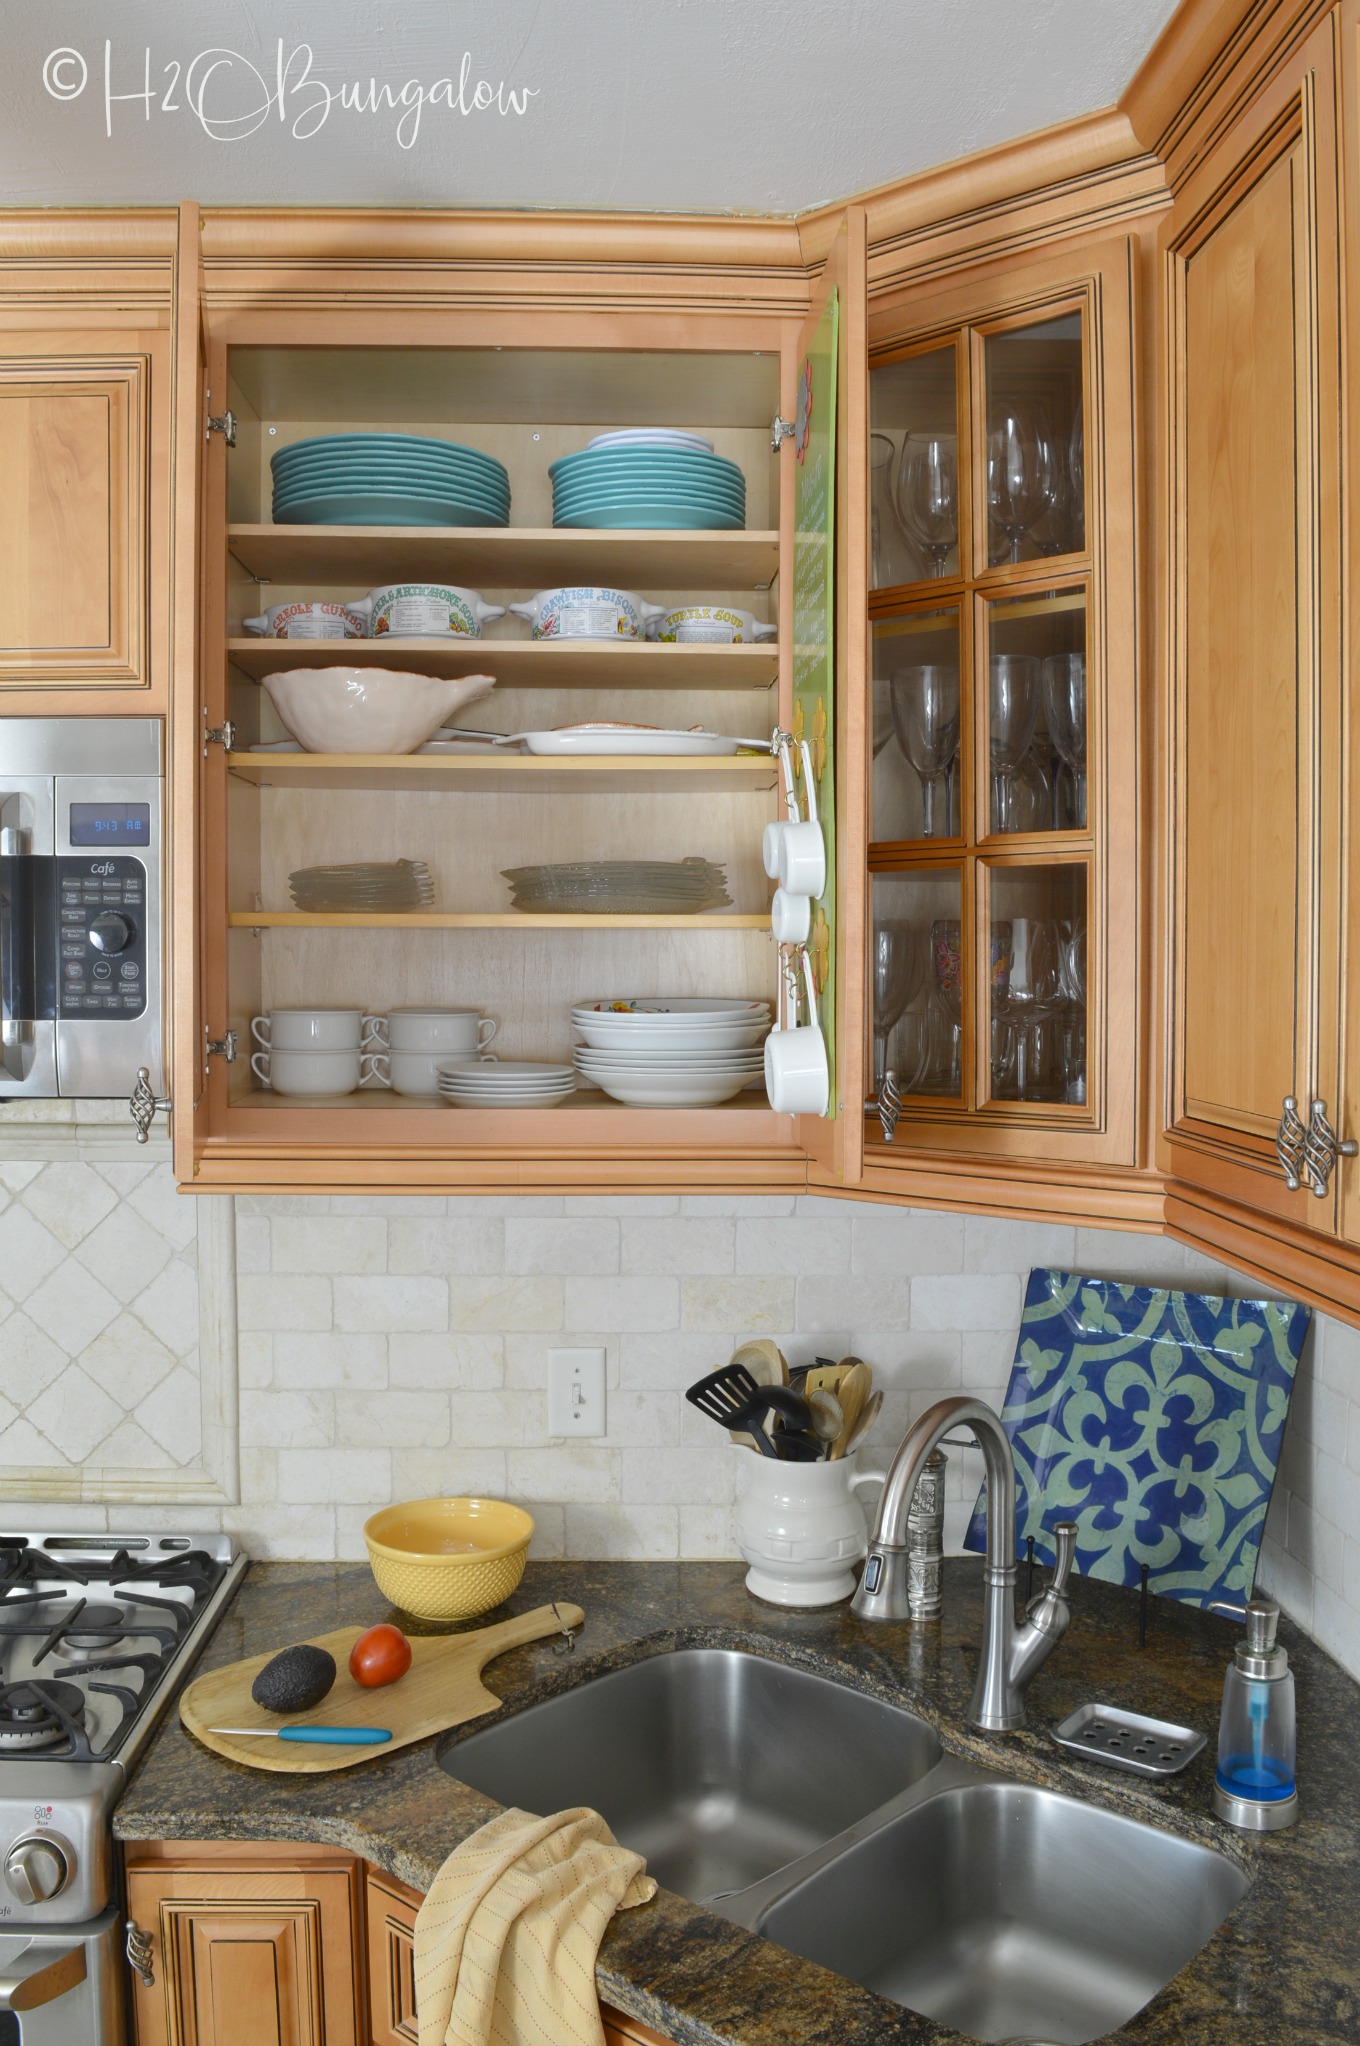 How To Add Extra Shelves To Kitchen Cabinets H2obungalow